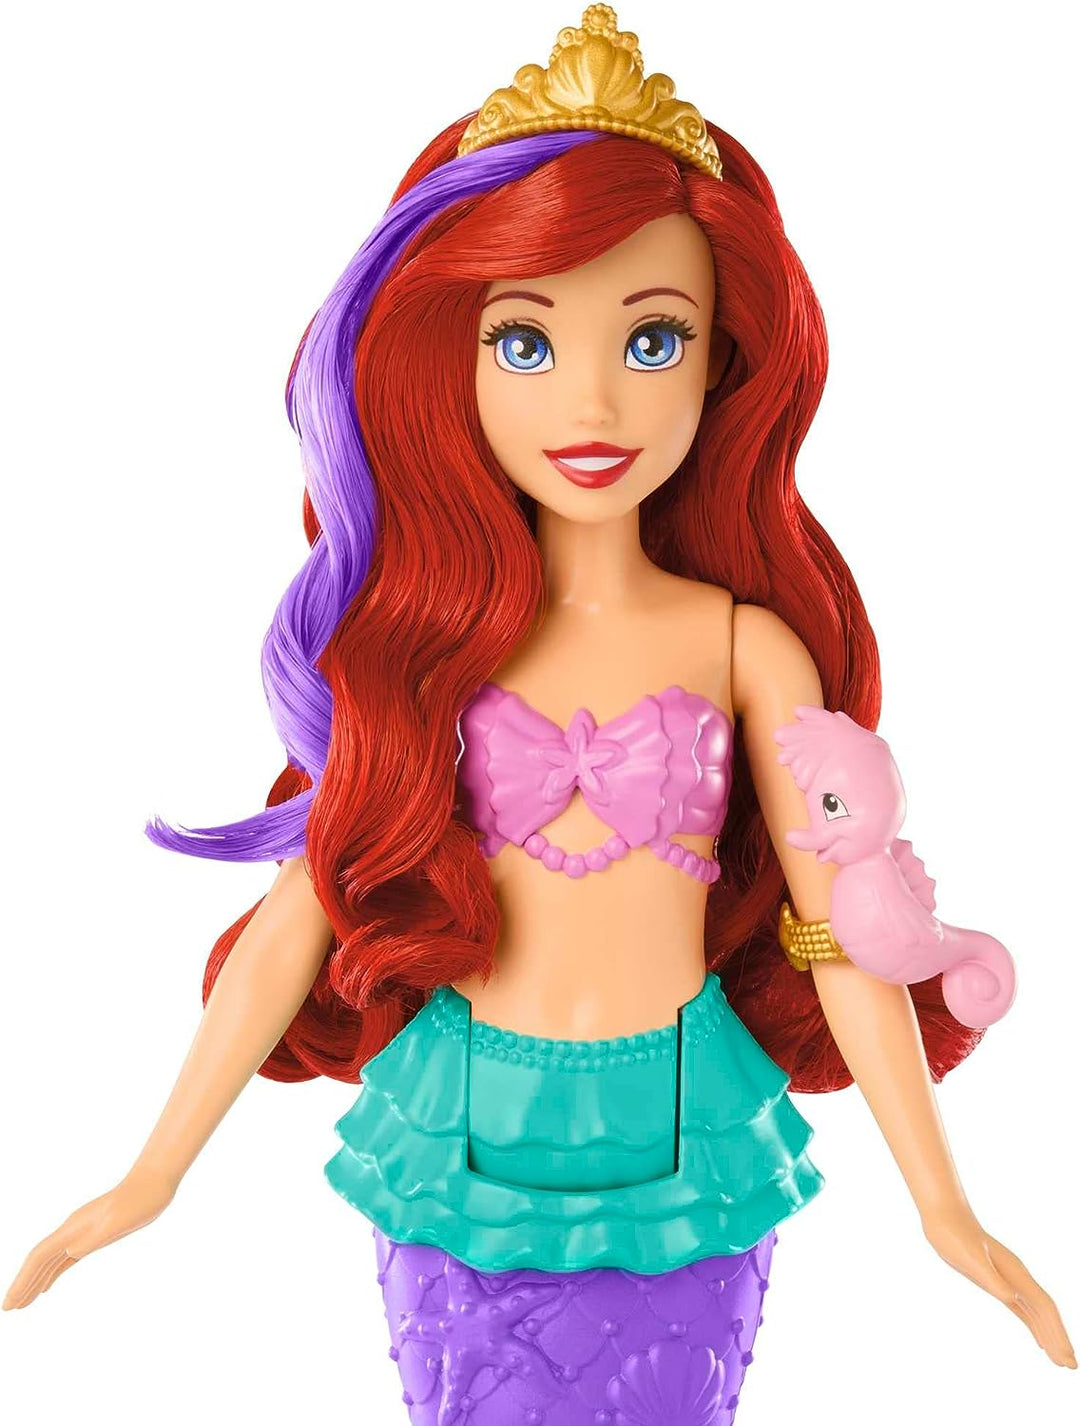 Disney Princess Toys, Ariel Swimming Mermaid Doll with Color-Change Hair and Tail